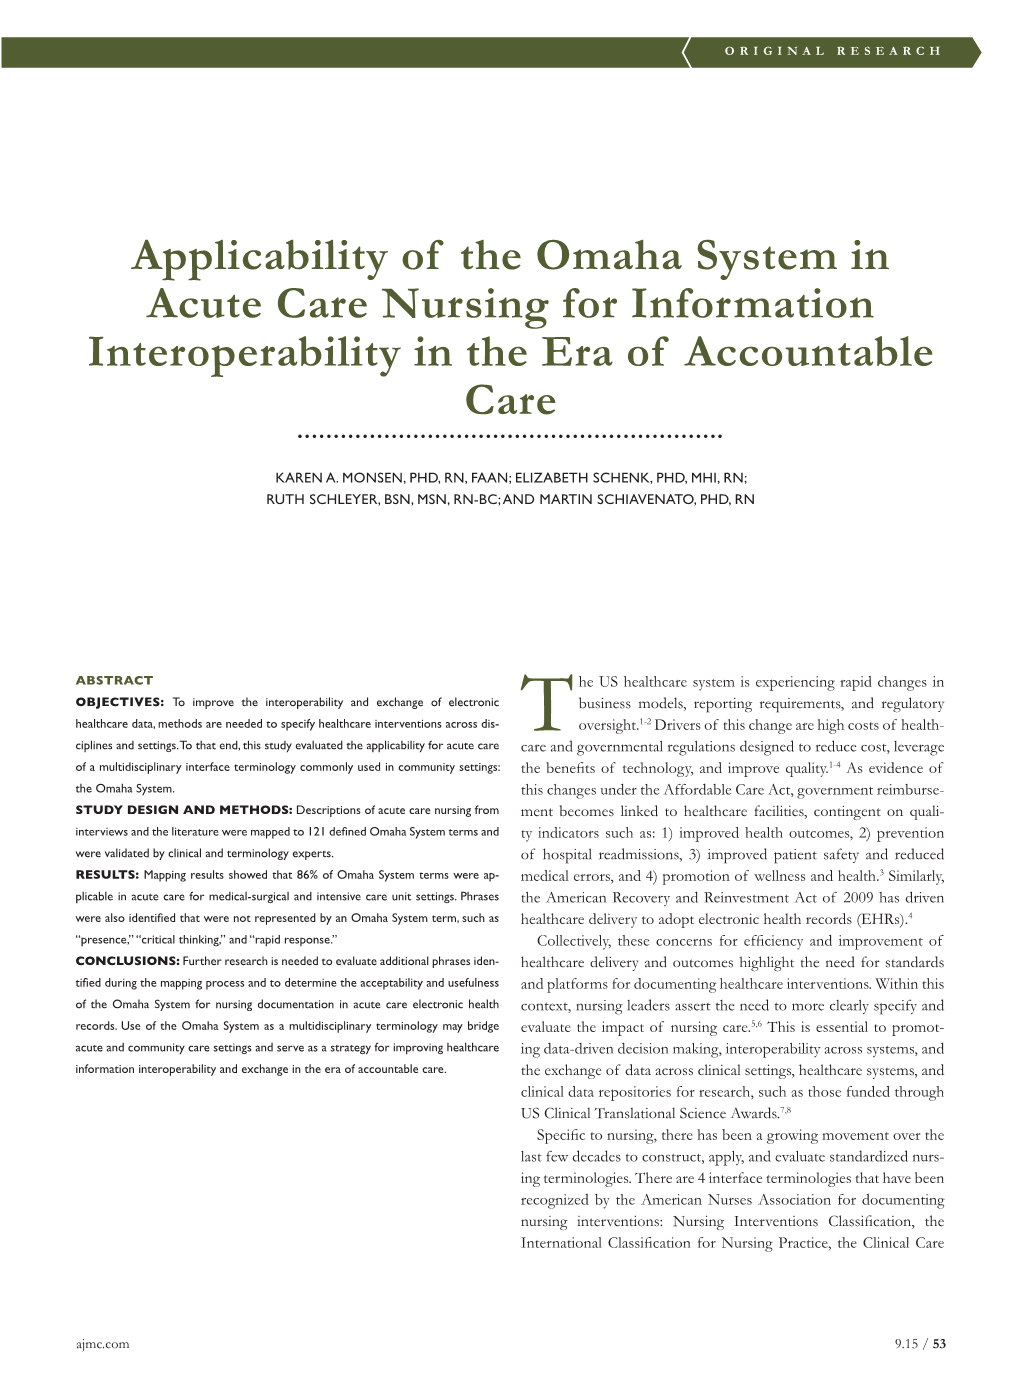 Applicability of the Omaha System in Acute Care Nursing for Information Interoperability in the Era of Accountable Care